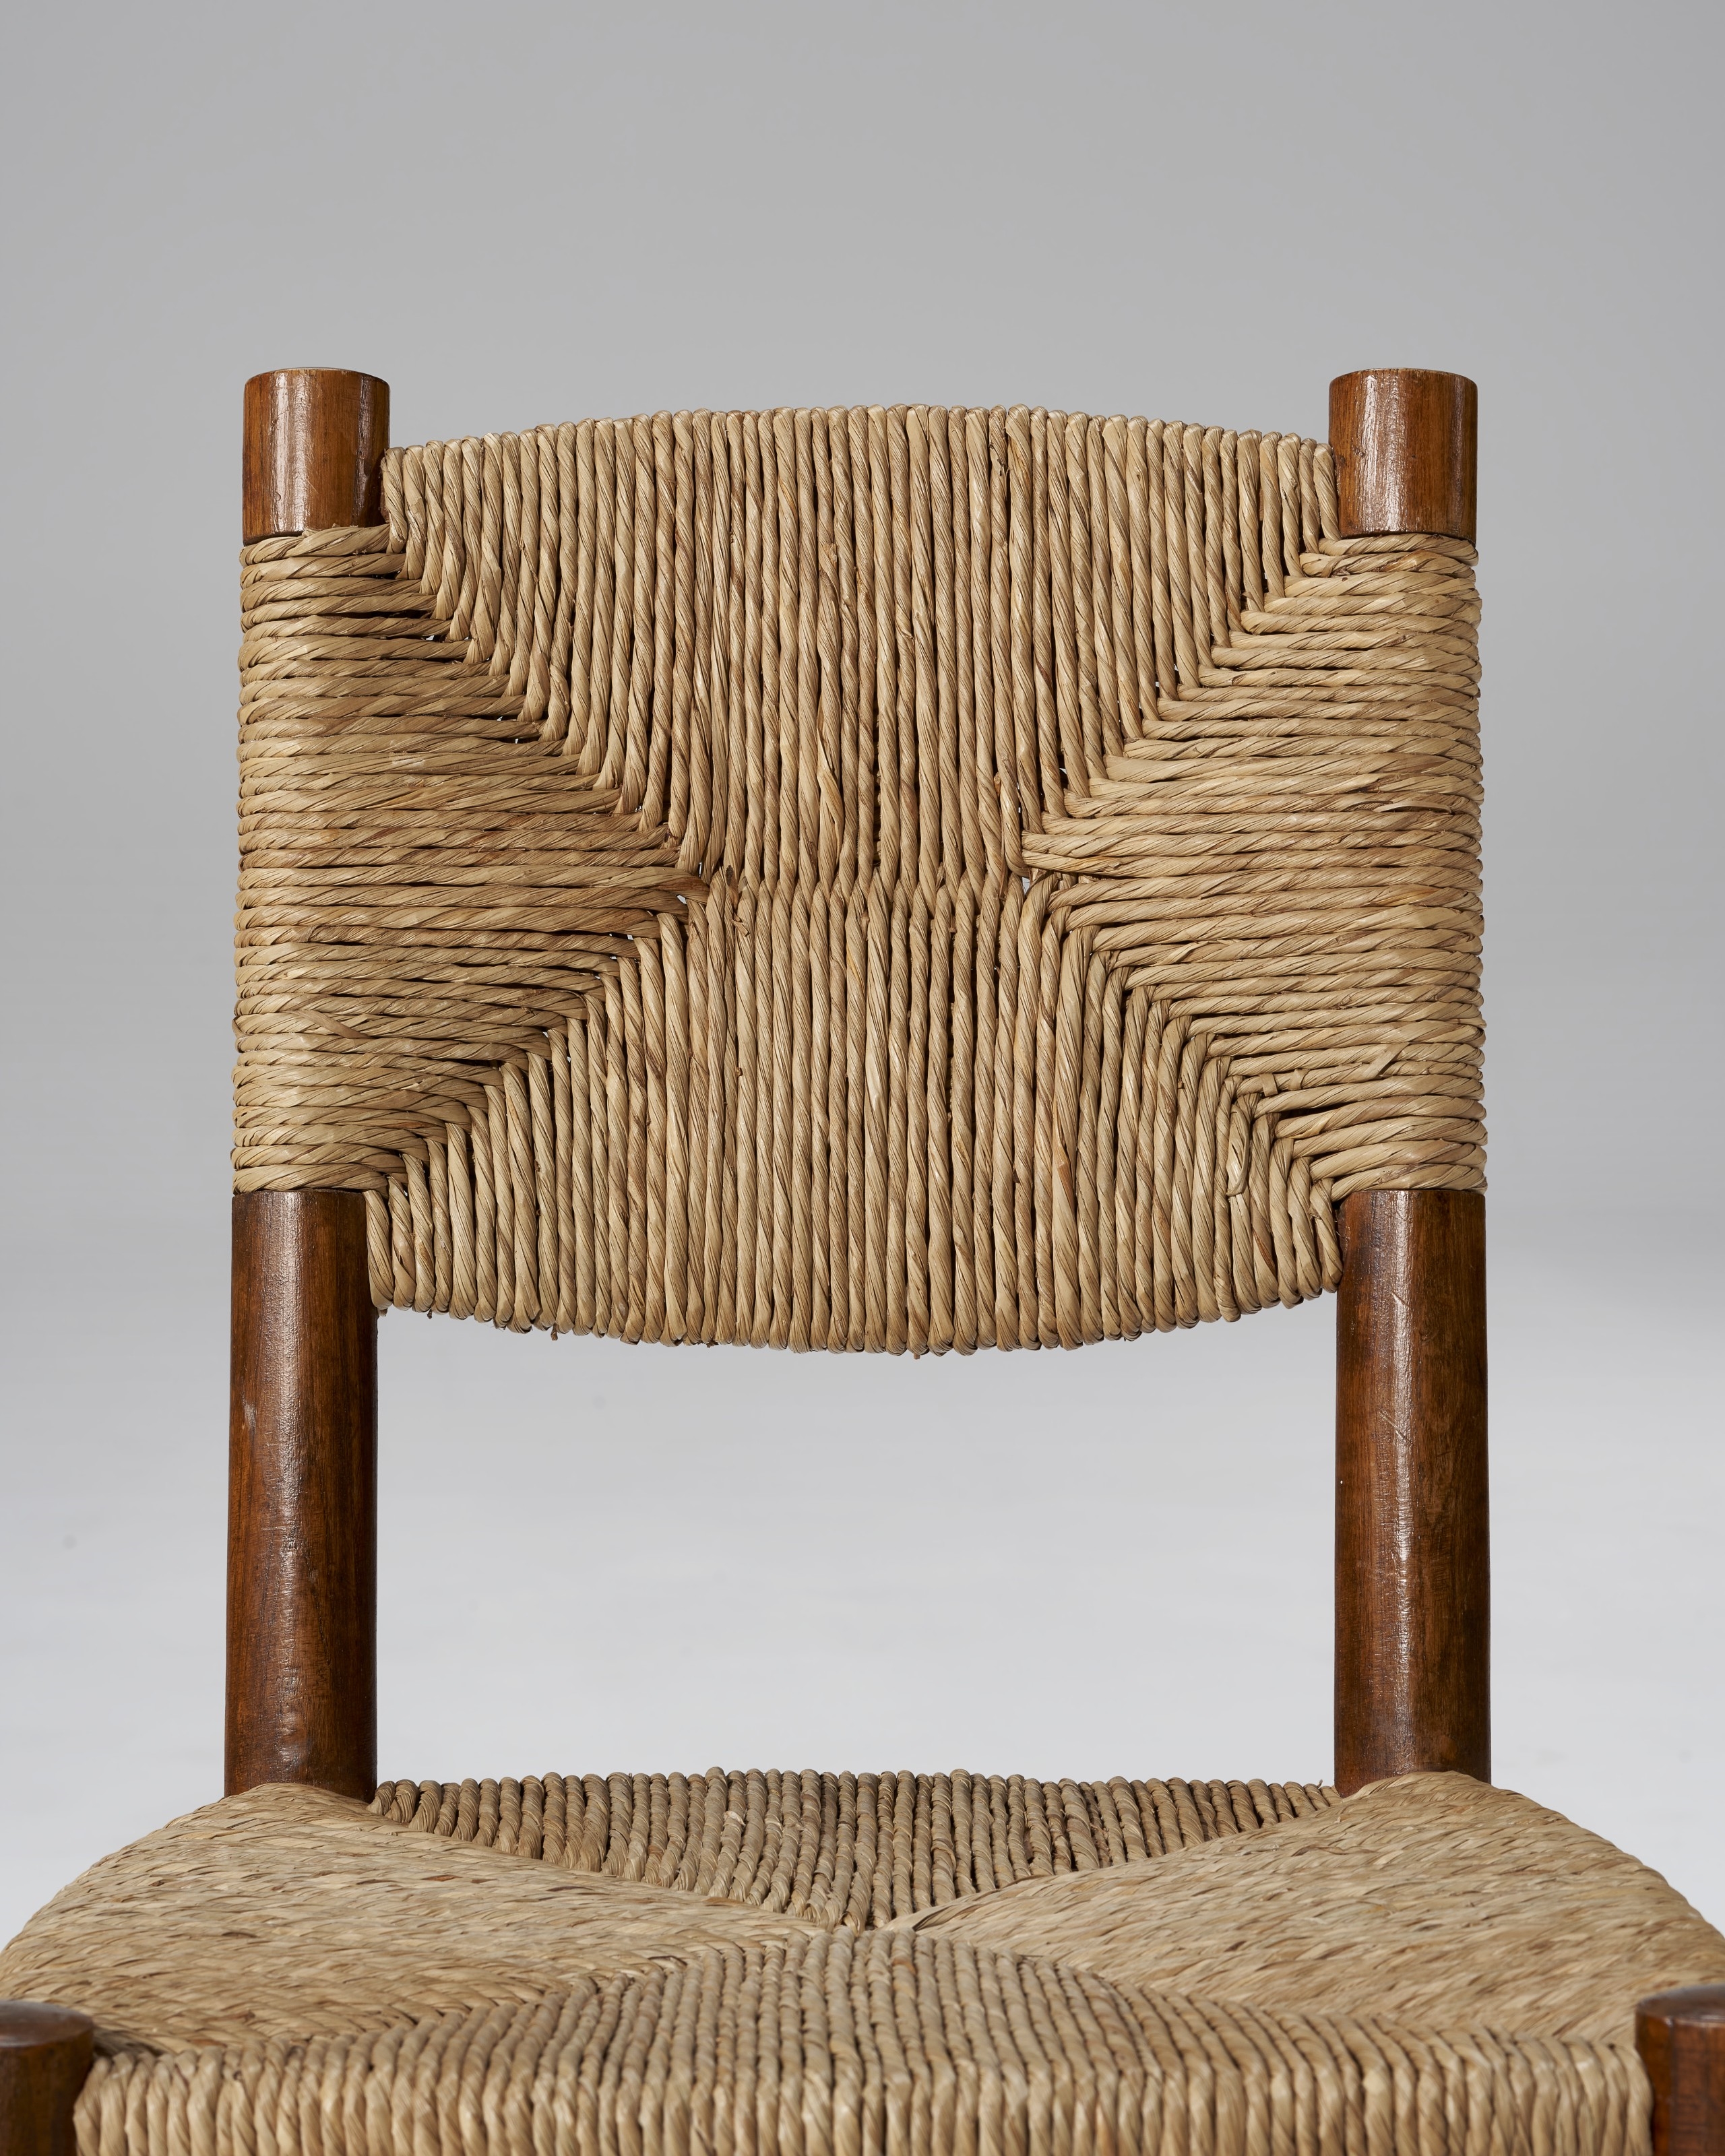 Charlotte Perriand, PAIR OF CHAIRS, MODEL NO. 19